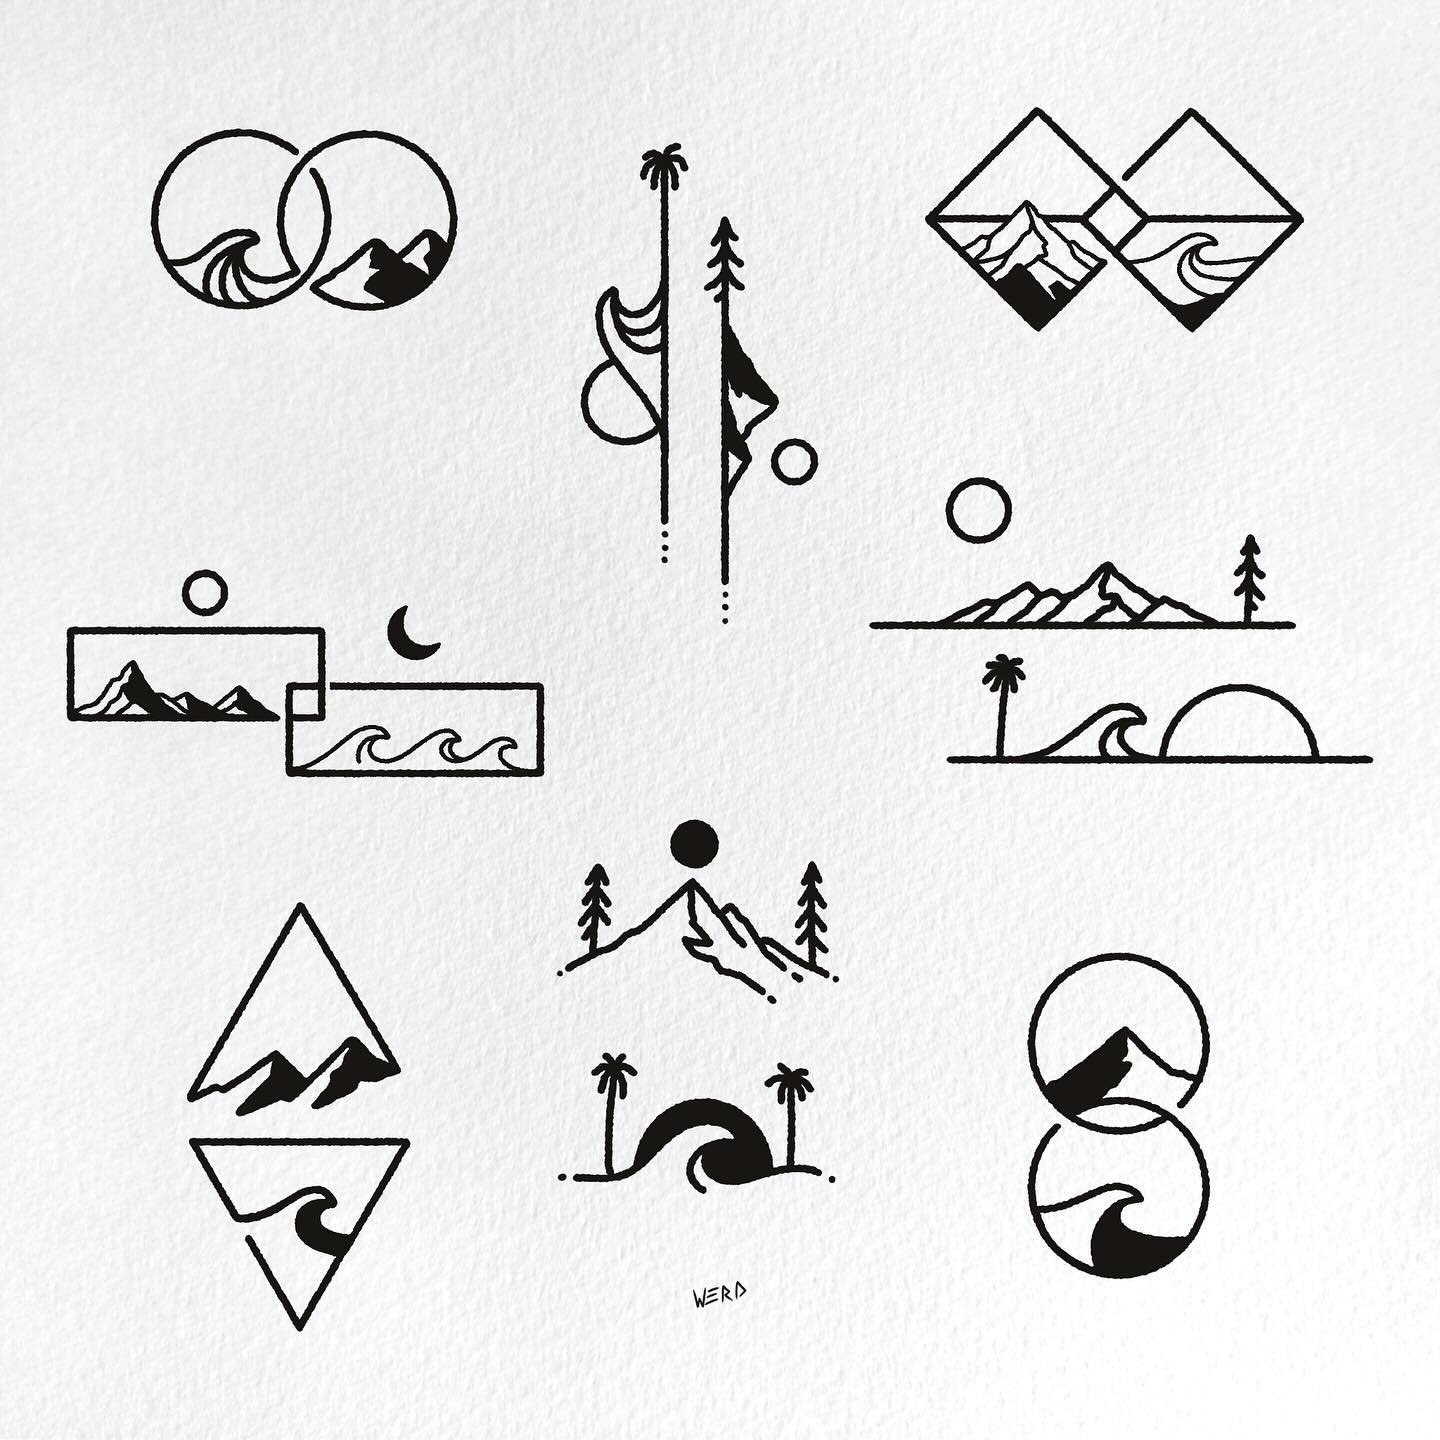 Minimal Matching-ish Tattoo Designs. If you and a friend want to use any of these designs for a tattoo, I just ask that you please support my work and purchase a tattoo certificate from my website. Link in bio!
.
.
.
.
.
#simpletattoo #minimaltattoo 